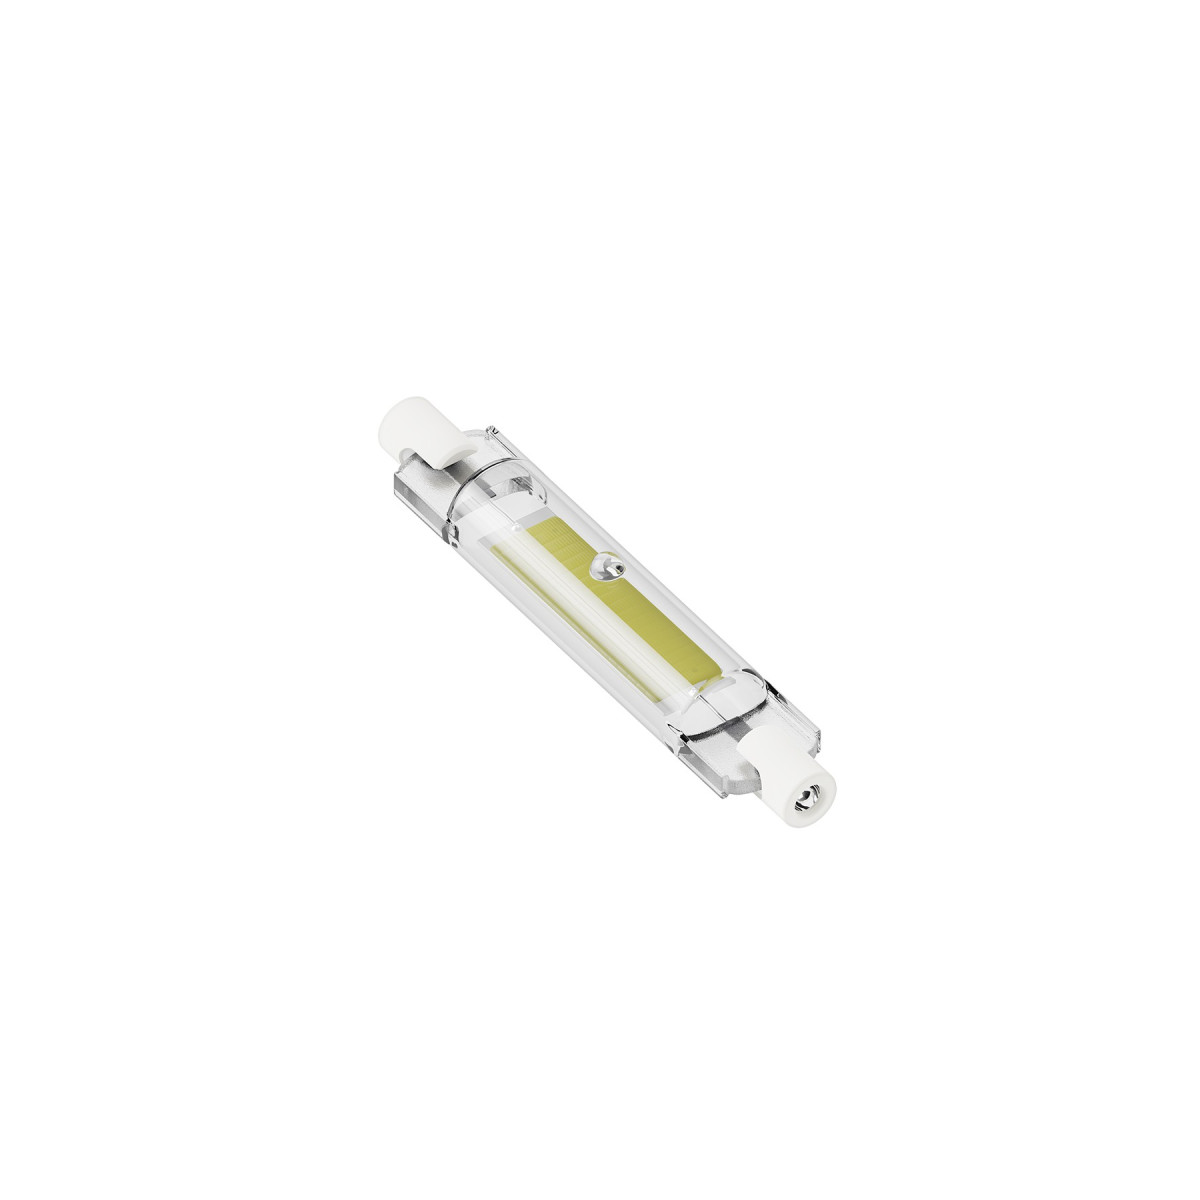  Lampe LED R7s 78mm Full Glass 220-240V 4W 400lm, 3000K dimmable